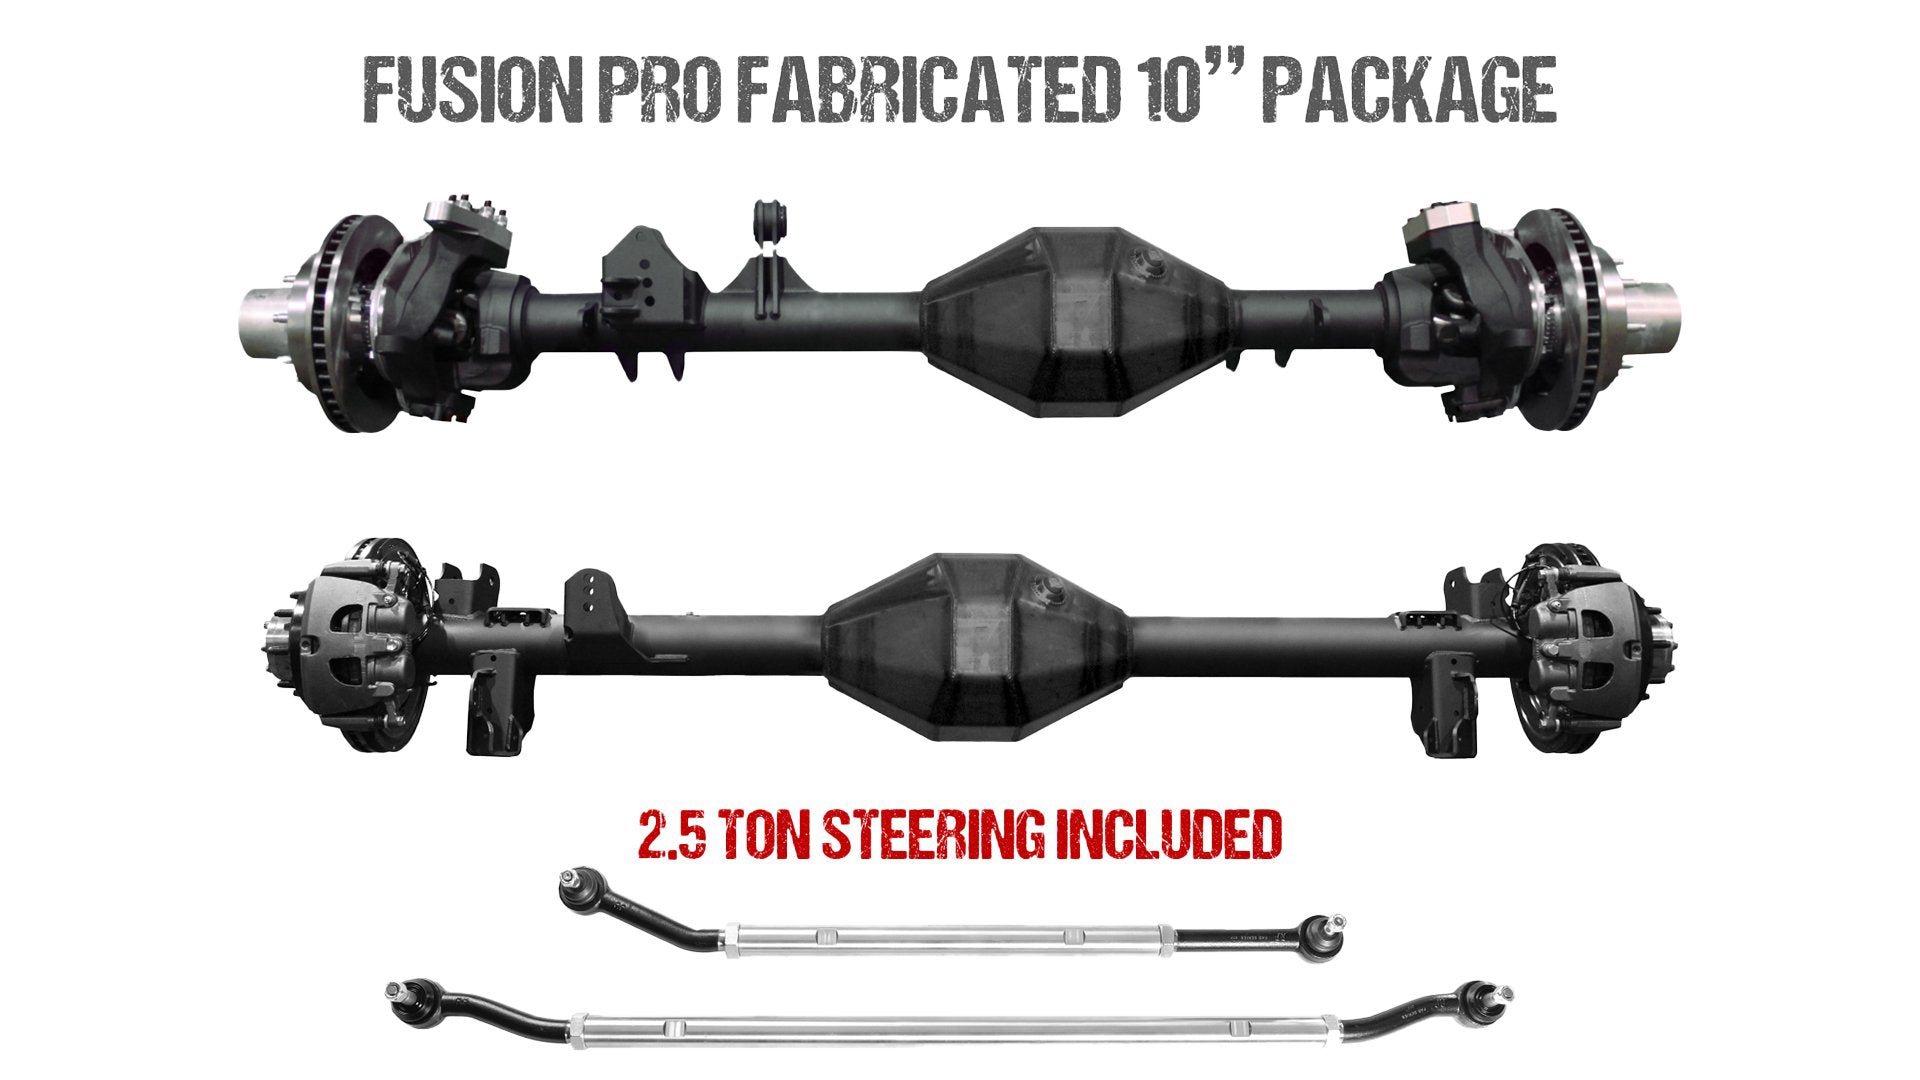 Fusion Pro Series Fabricated 10